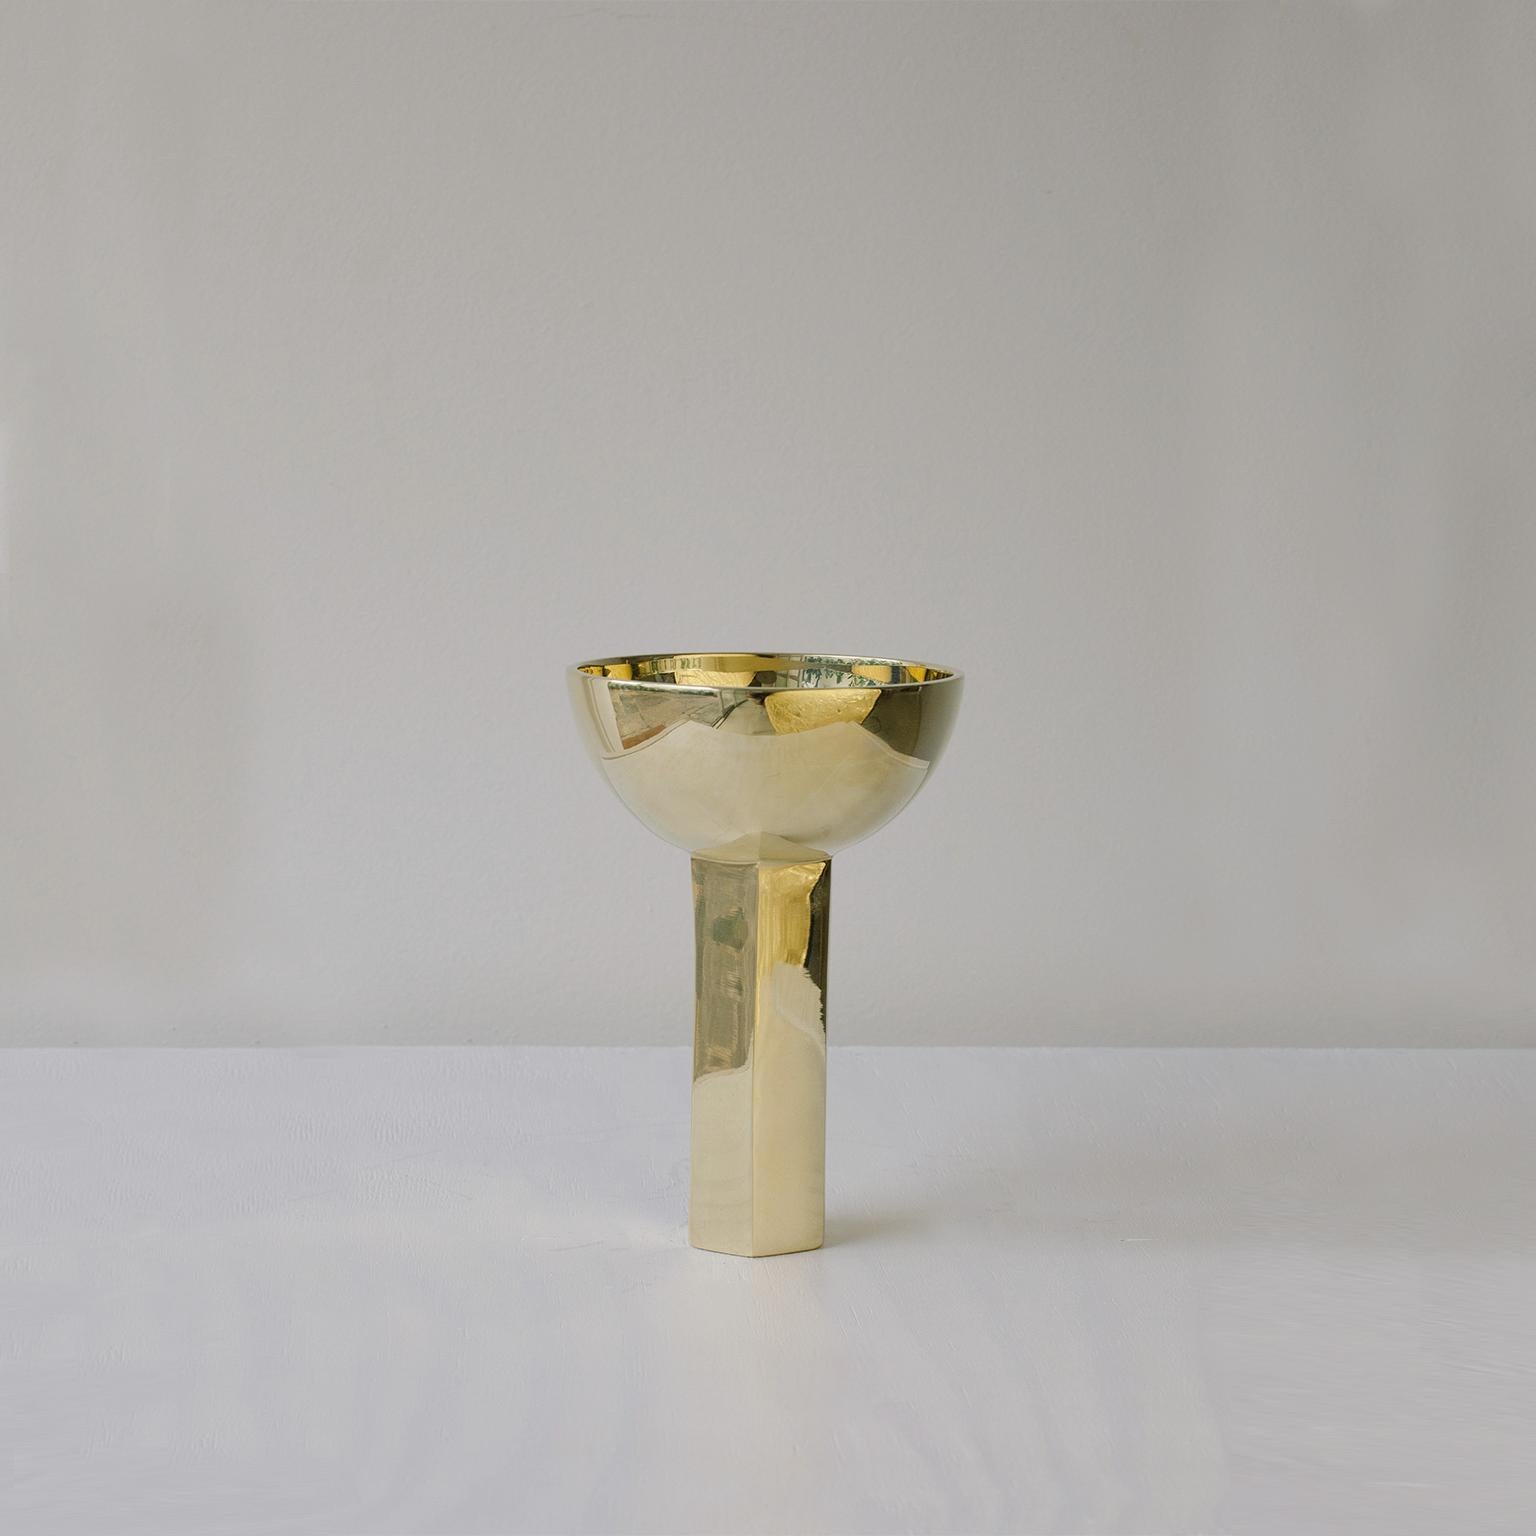 Produced in São Paulo, Brazil.

This contemporary cup in cast brass was meticulously handmade by master artisans one piece at a time. It is therefore quite difficult, if not impossible to make identical items. The brass casting is produced by